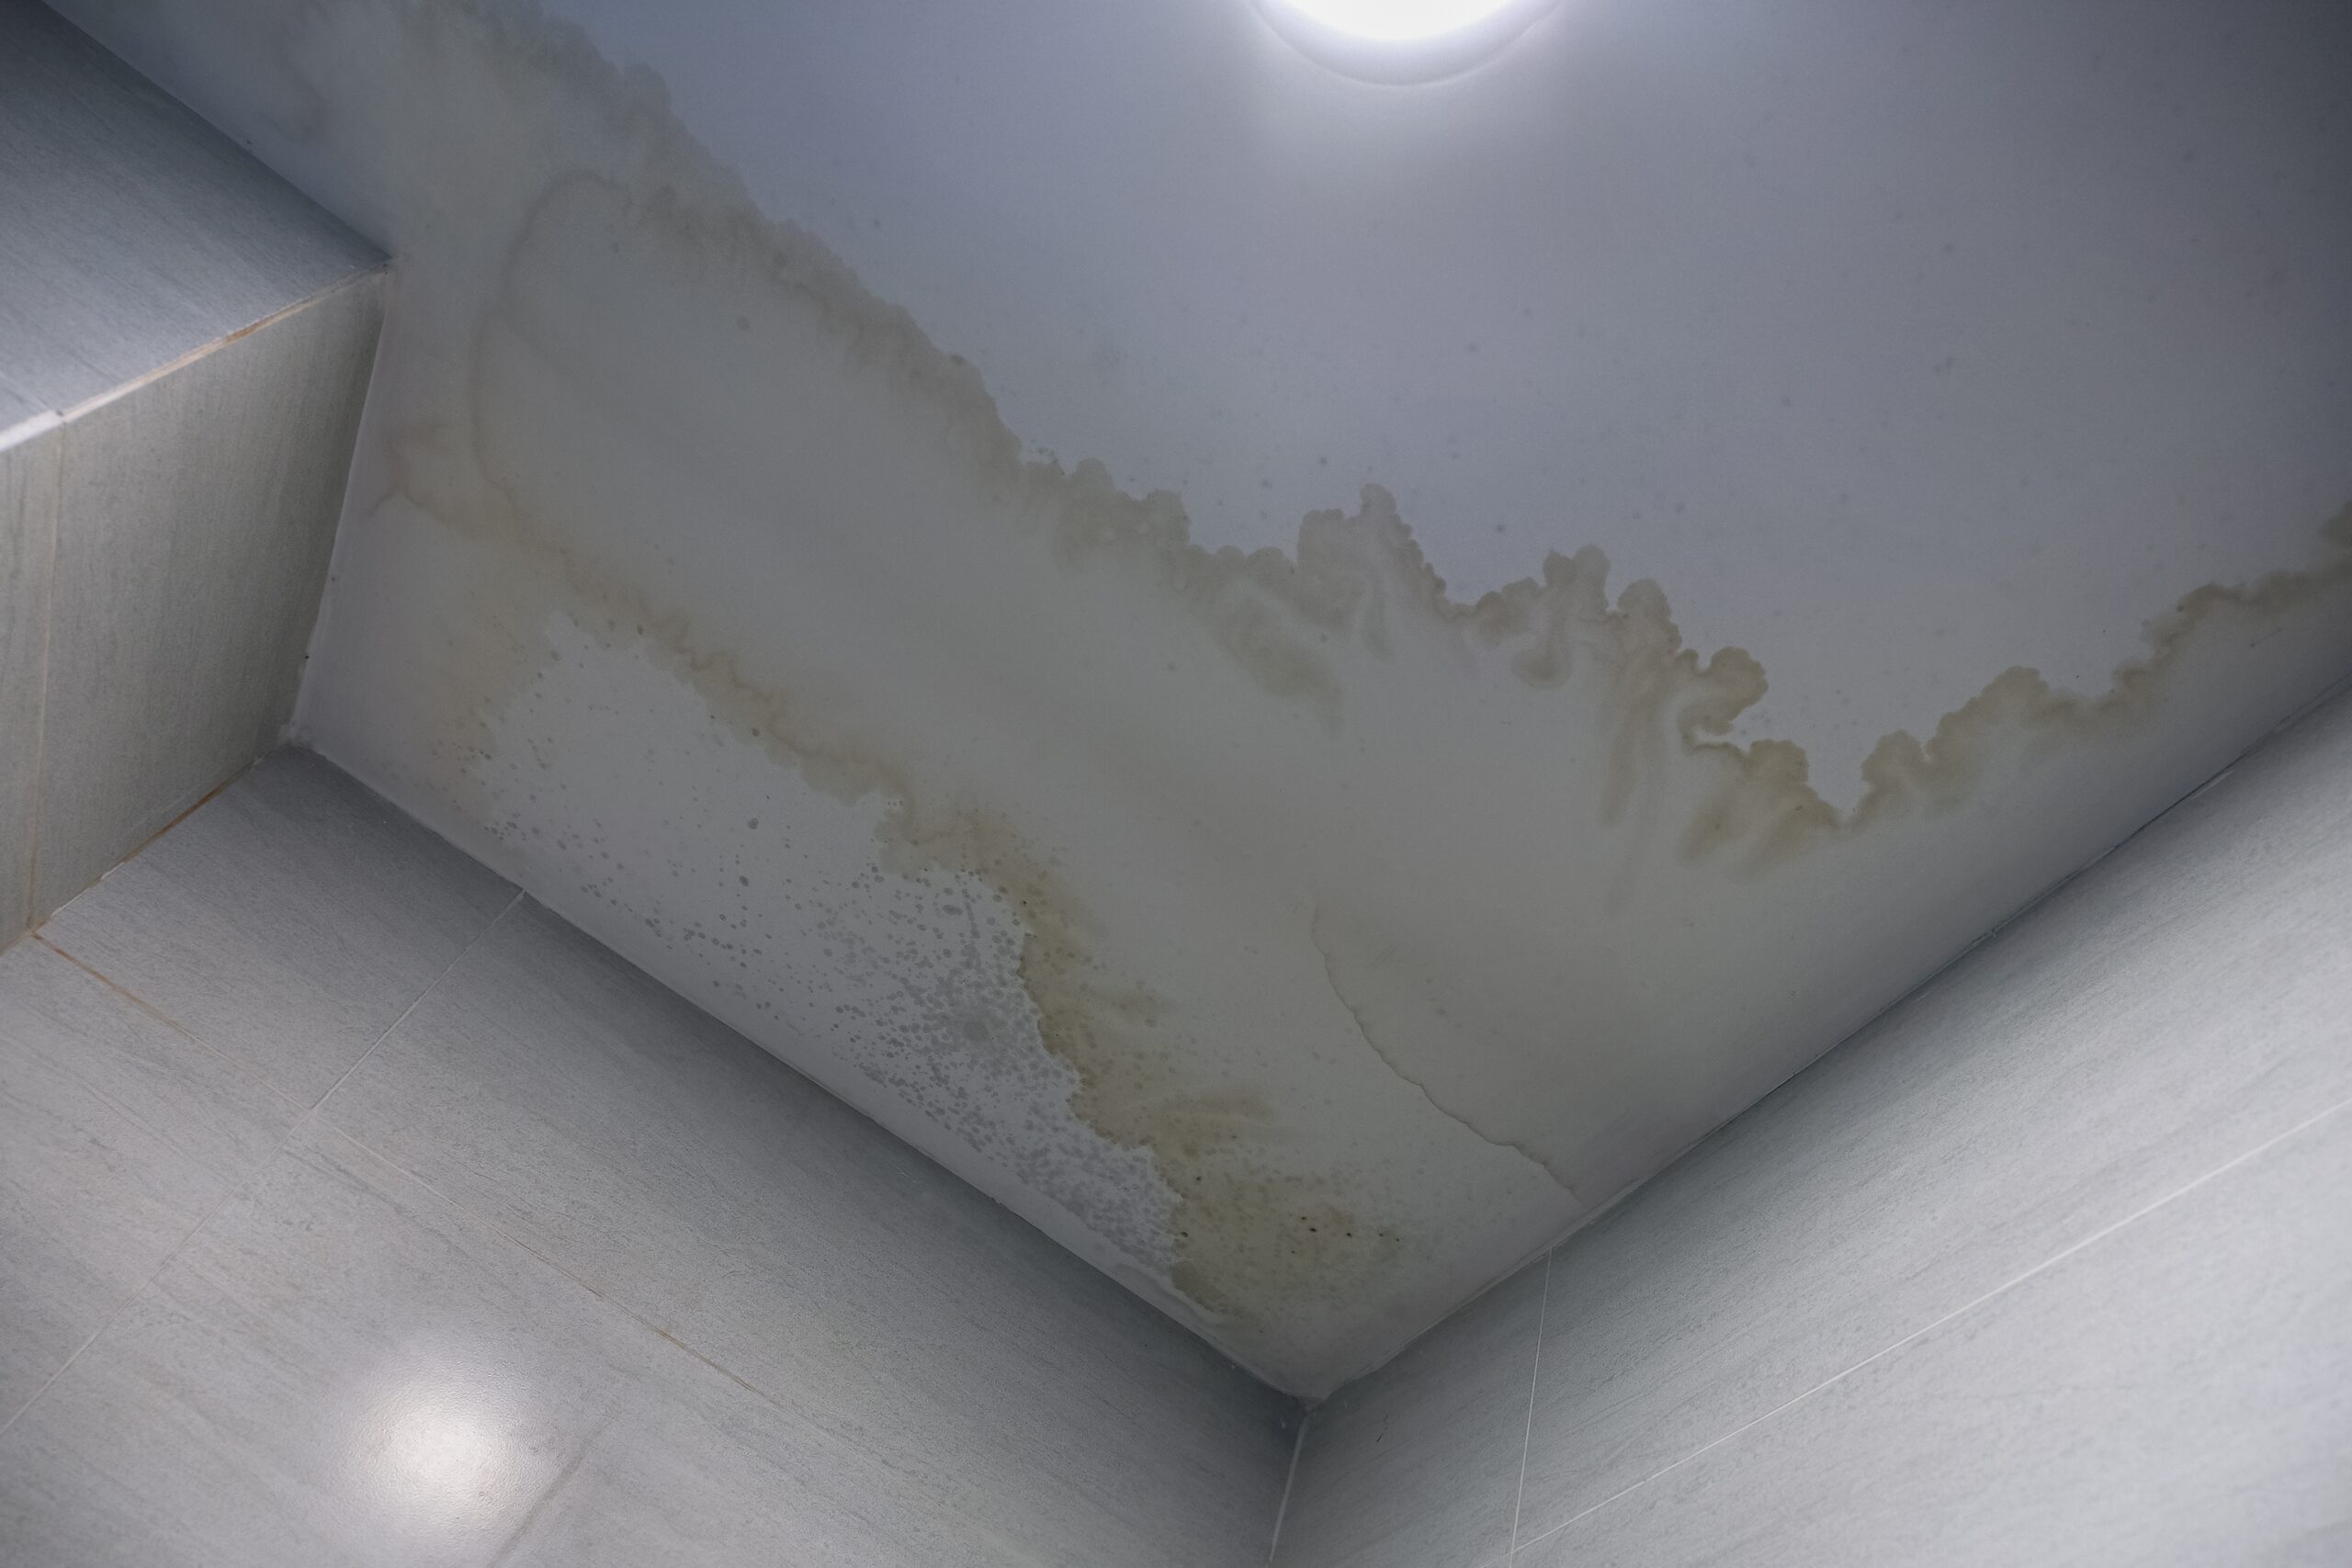 Water stains on your ceiling can indicate a leak in your roof. Call AGM Roofing for roof repair in Ocala Fl